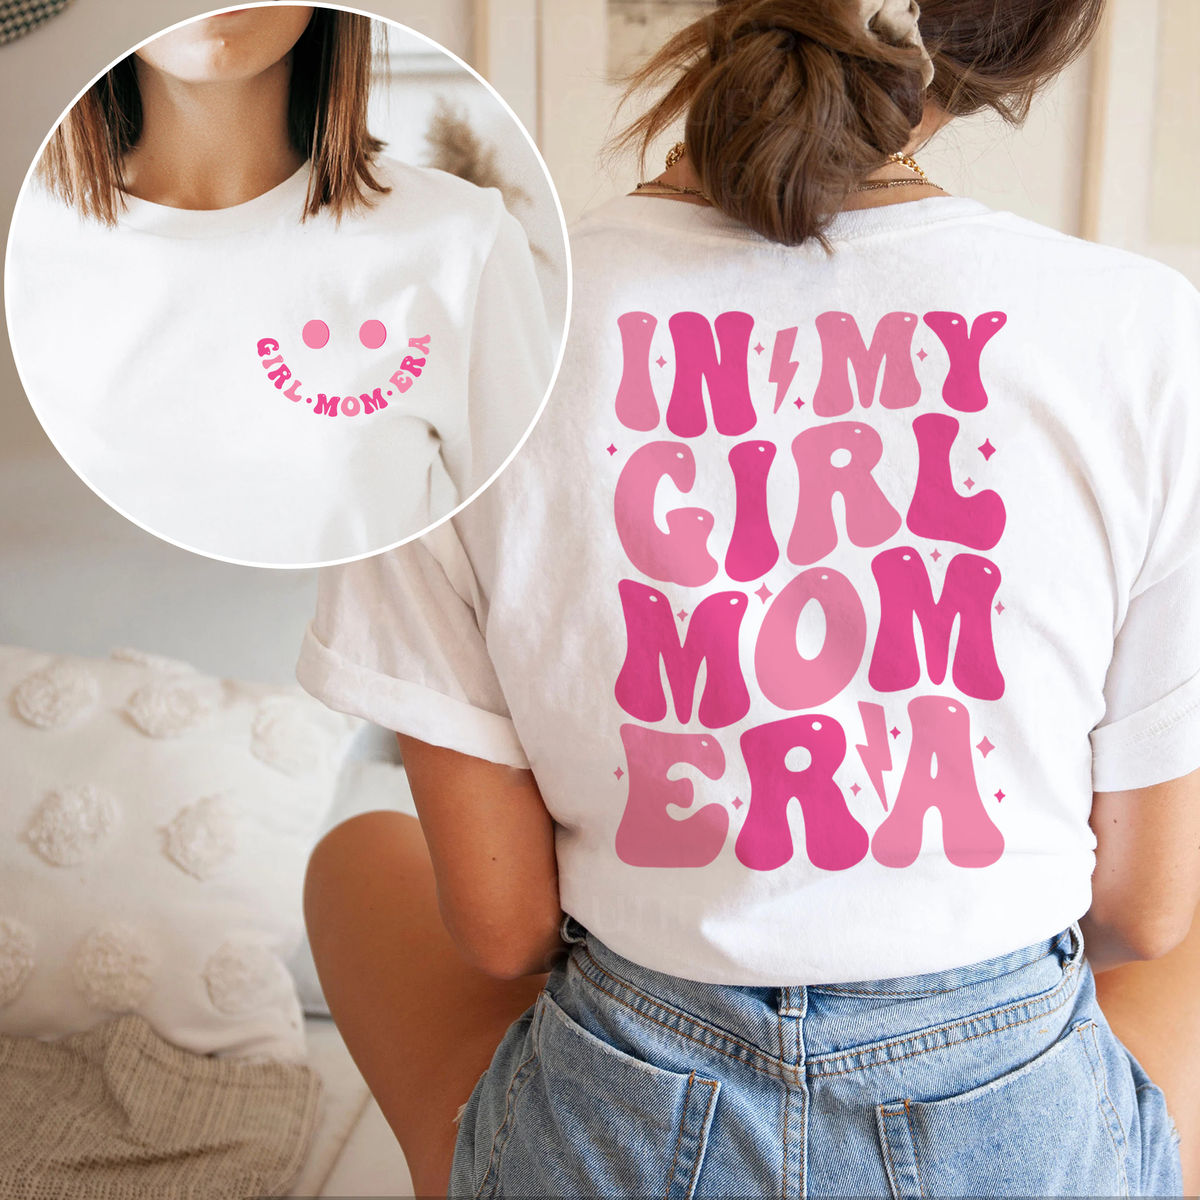 Personalized Shirt - Mother's Day Gift - In My Girl Mom Era